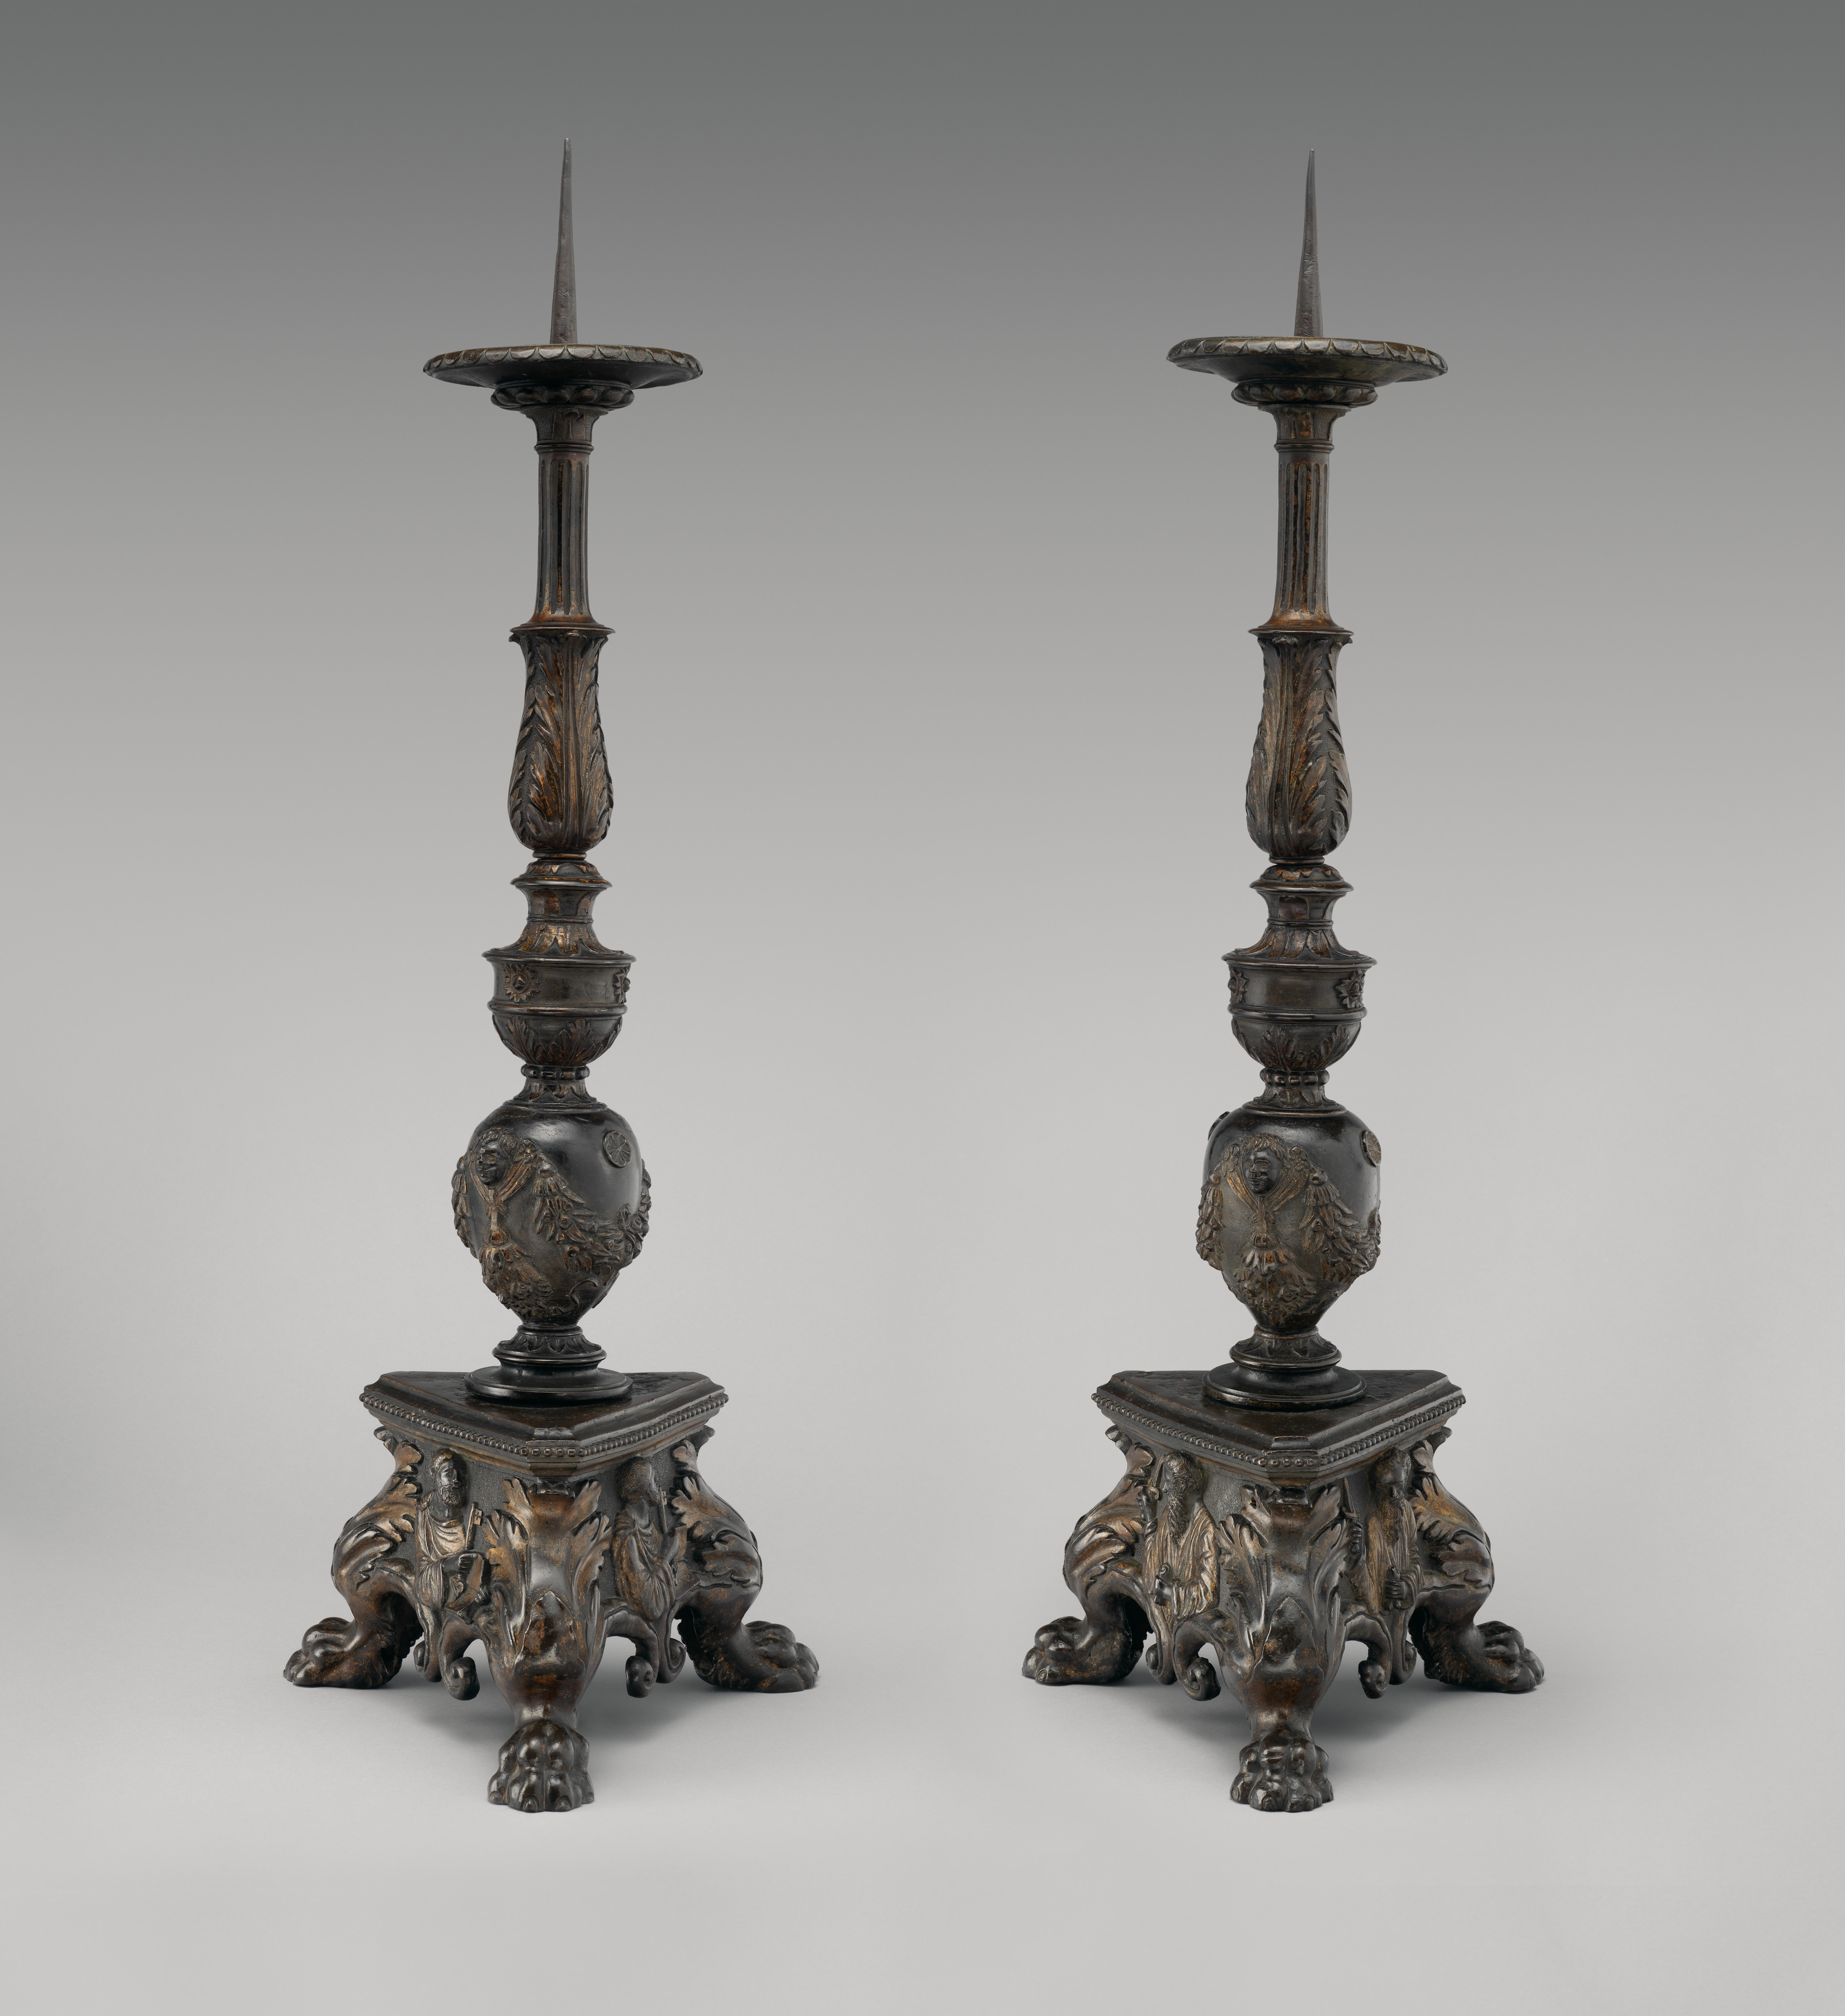 Workshop of Vincenzo Grandi  Altar candlestick with busts in